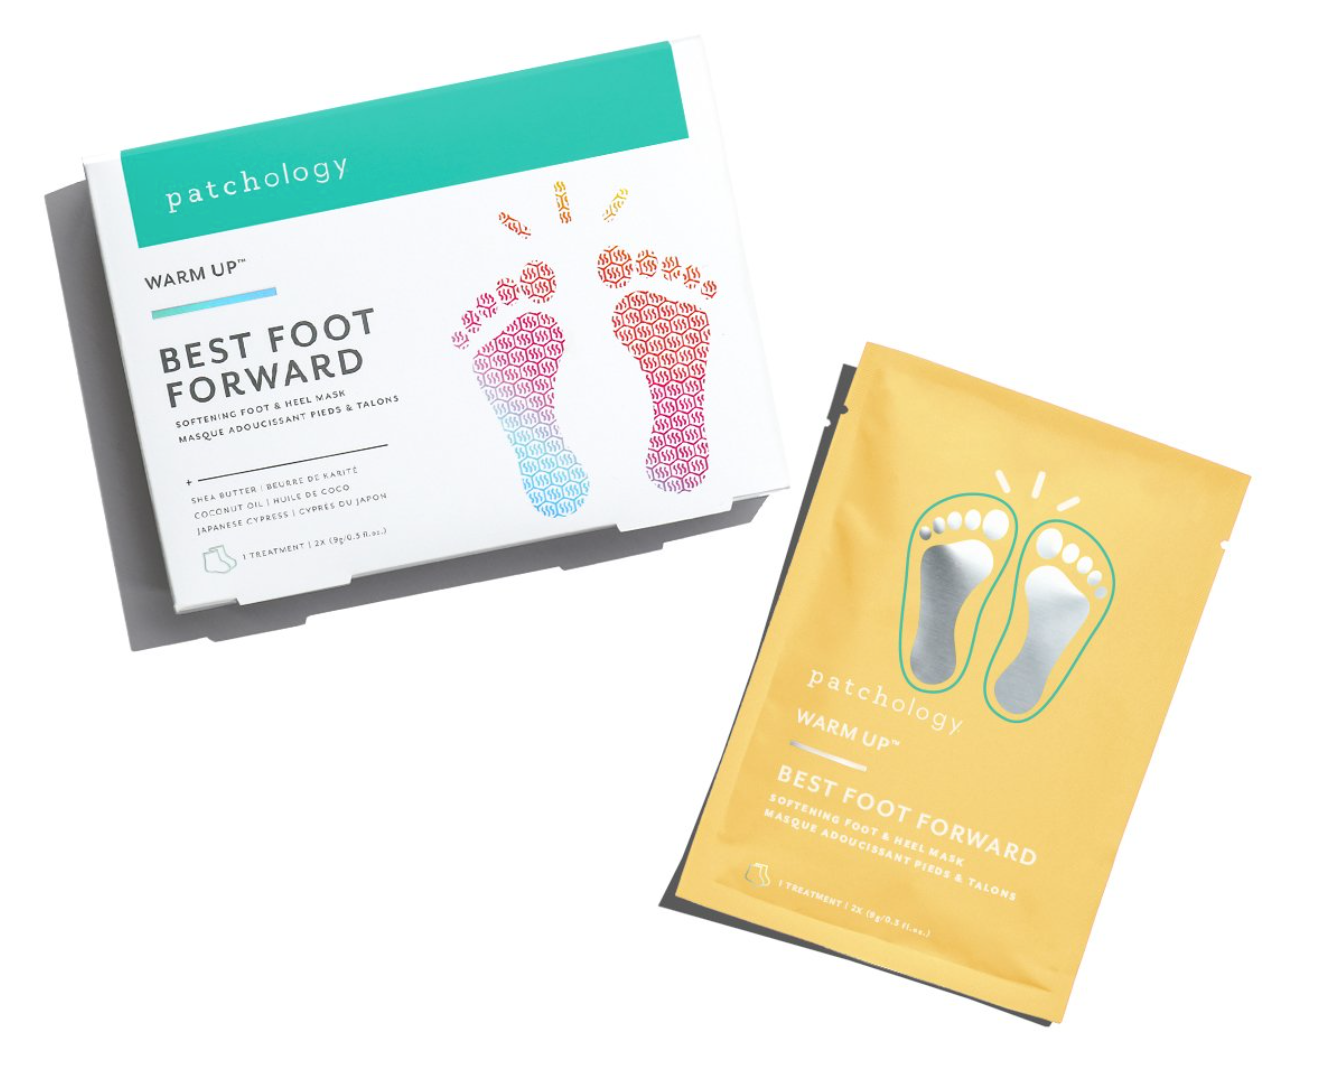 Best Foot Forward Softening Heel and Foot Mask